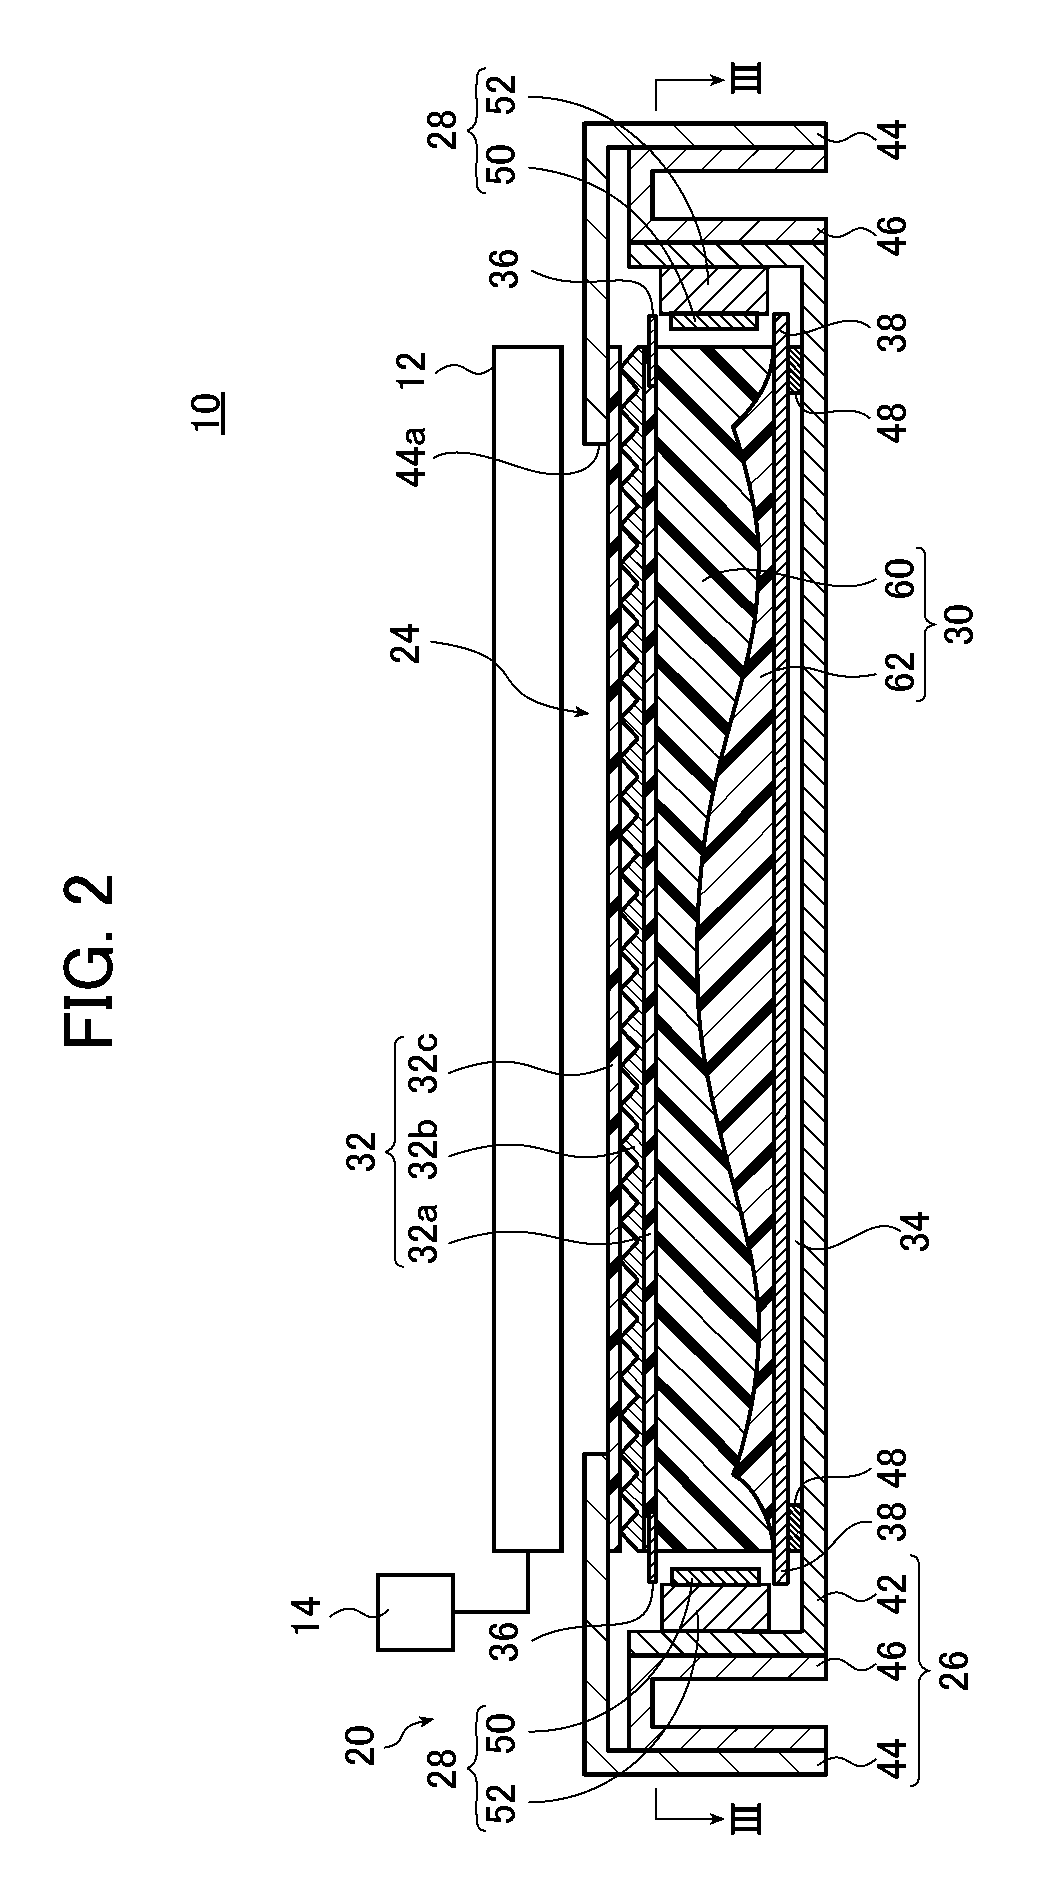 Light guide plate and planar lighting device